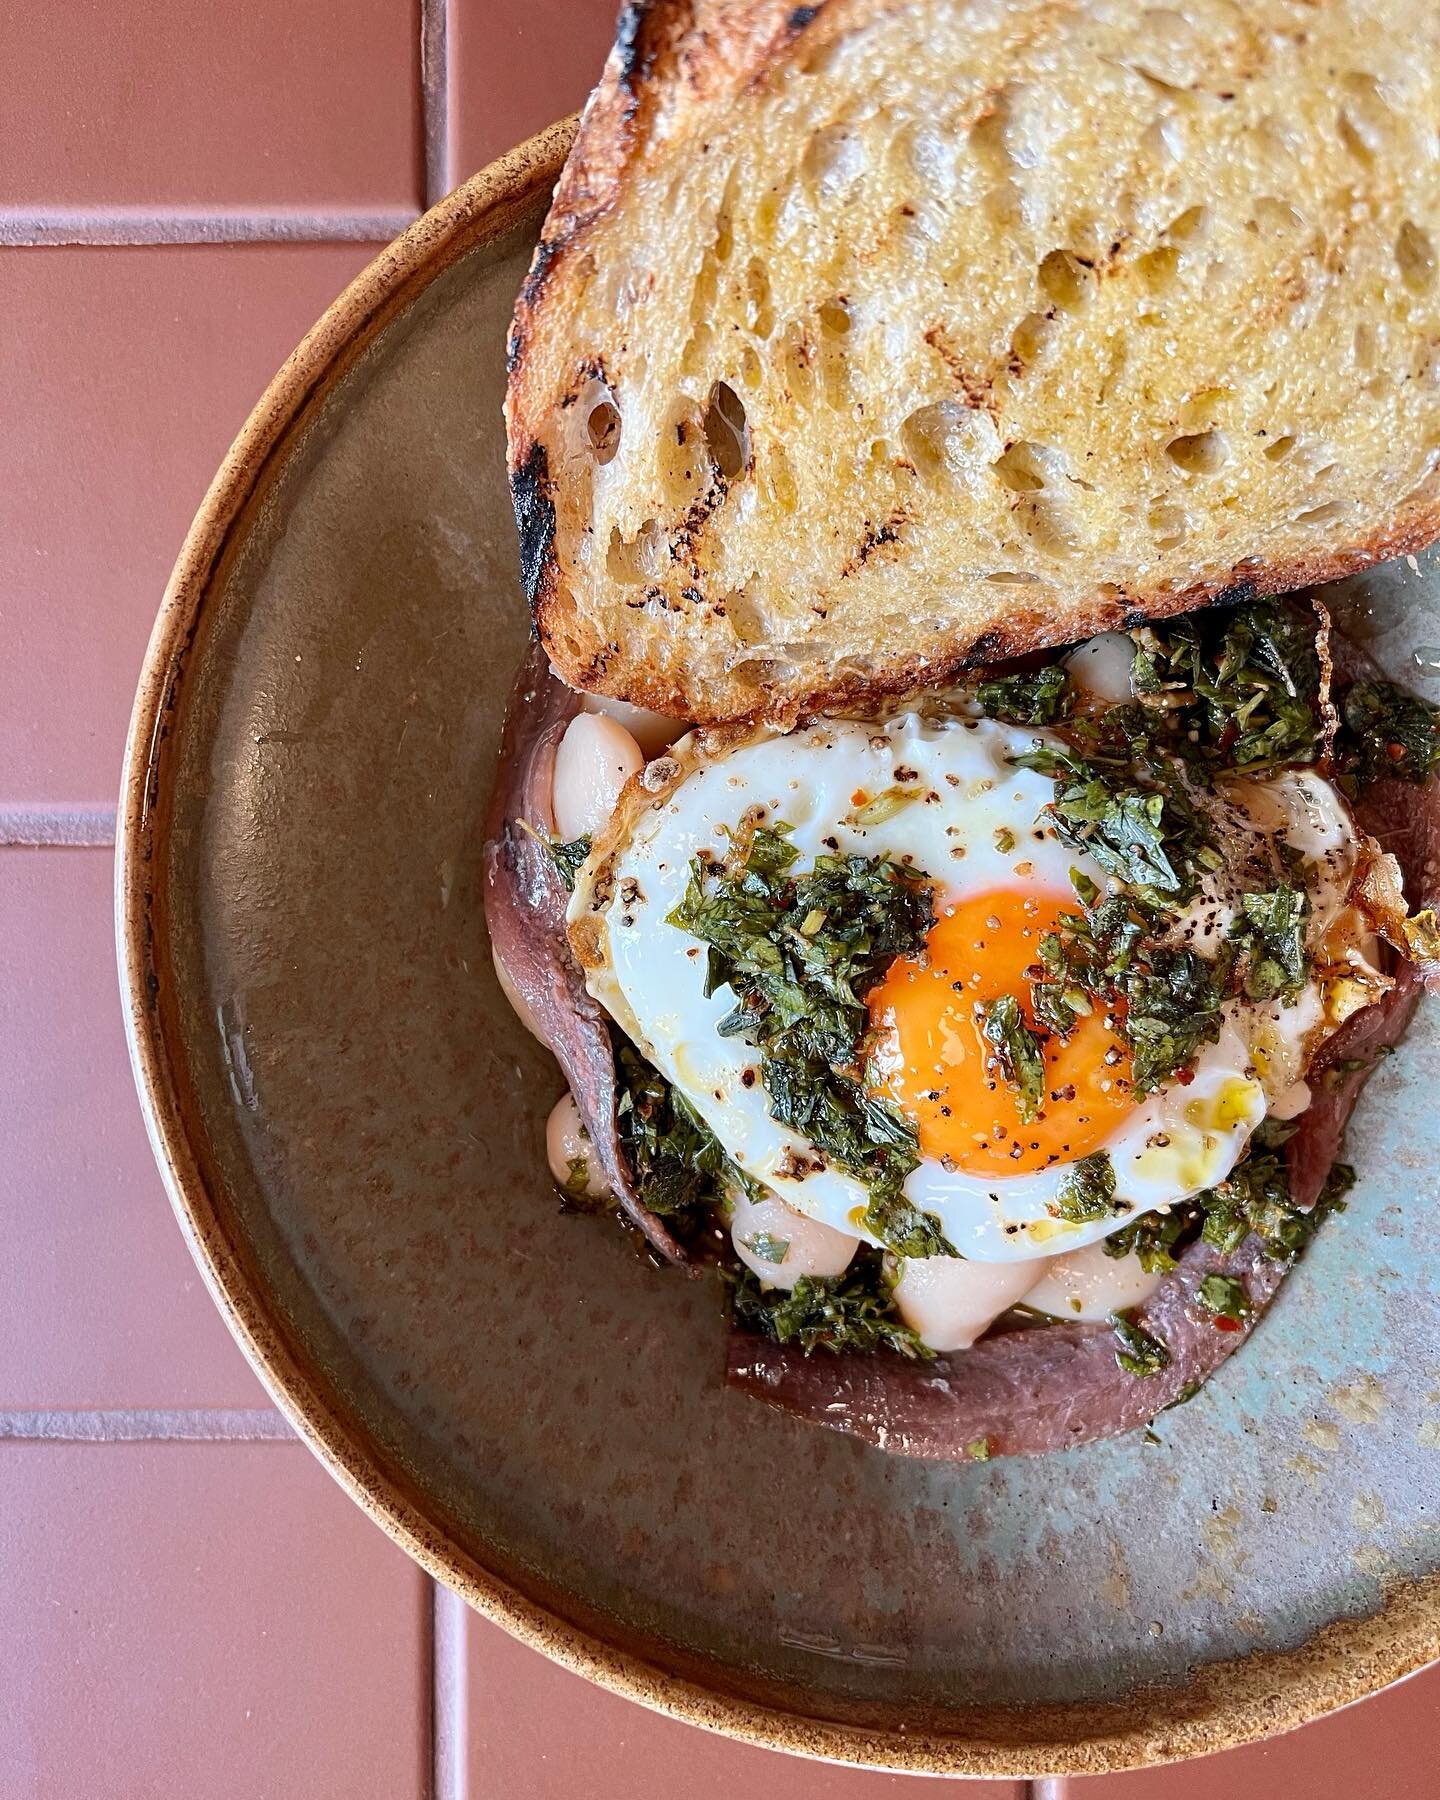 What a weekend!
We launched our new seasonal menu this week and wow, our butter bean, ortiz anchovies, with chimichurri and fried egg dish is getting a lot of love!  It&rsquo;s on our breakfast menu so come in this Tuesday from 7am and tell us what y